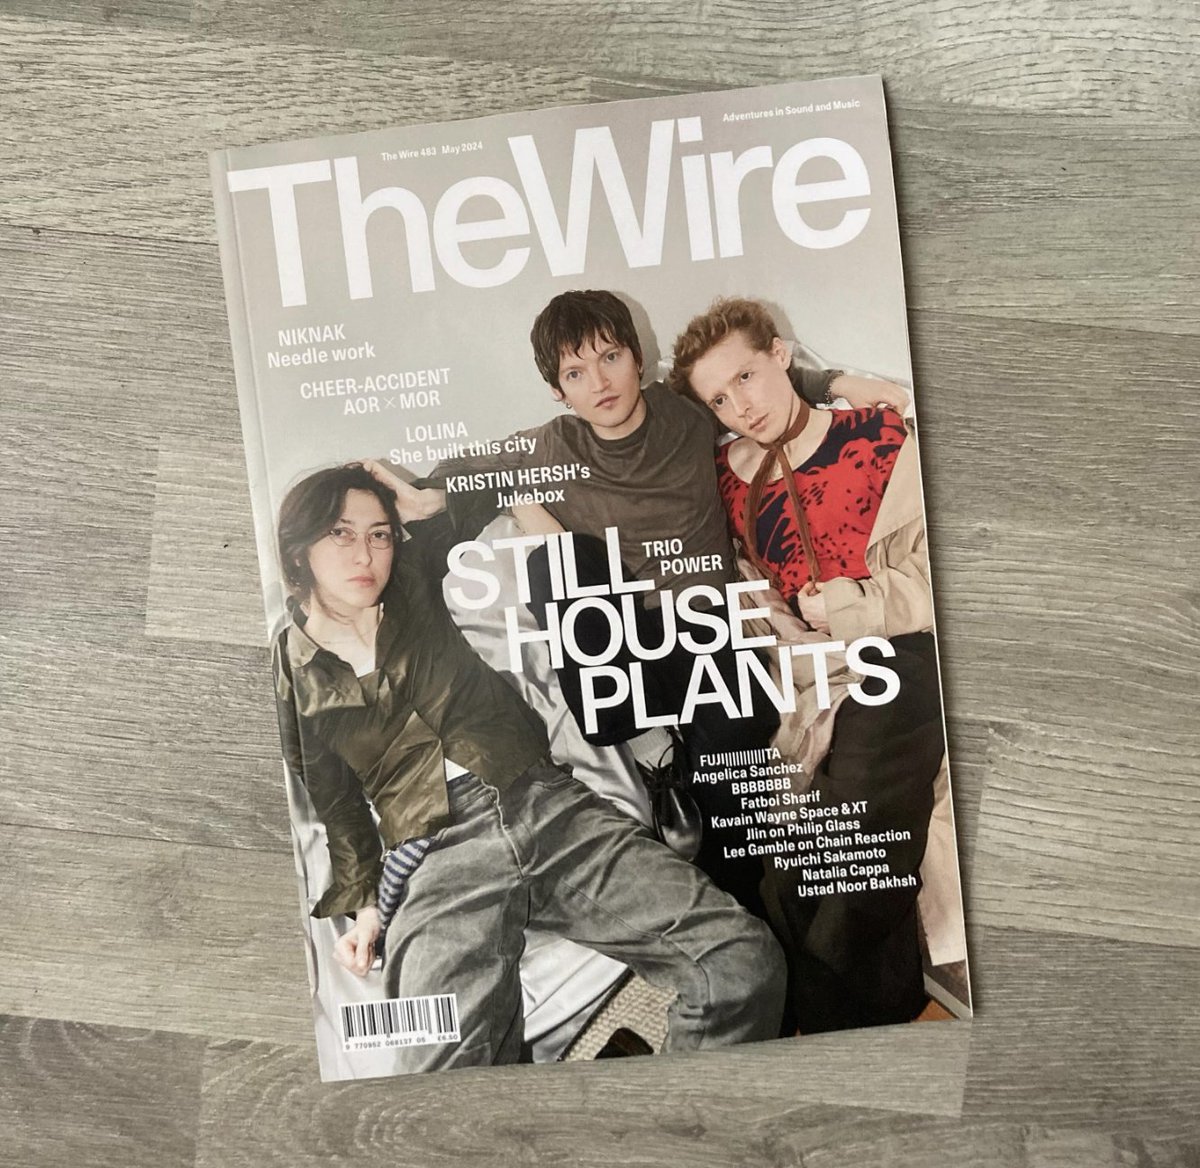 Look who the cover stars of The Wire are this month! 😍 So proud of Still House Plants and how far they've come over the years. Come celebrate this and the launch of their new album at Fairfield Working Men's Club (Govan) on the 19th of April 🪴🌱🌿 counterflows.com/event/still-ho…